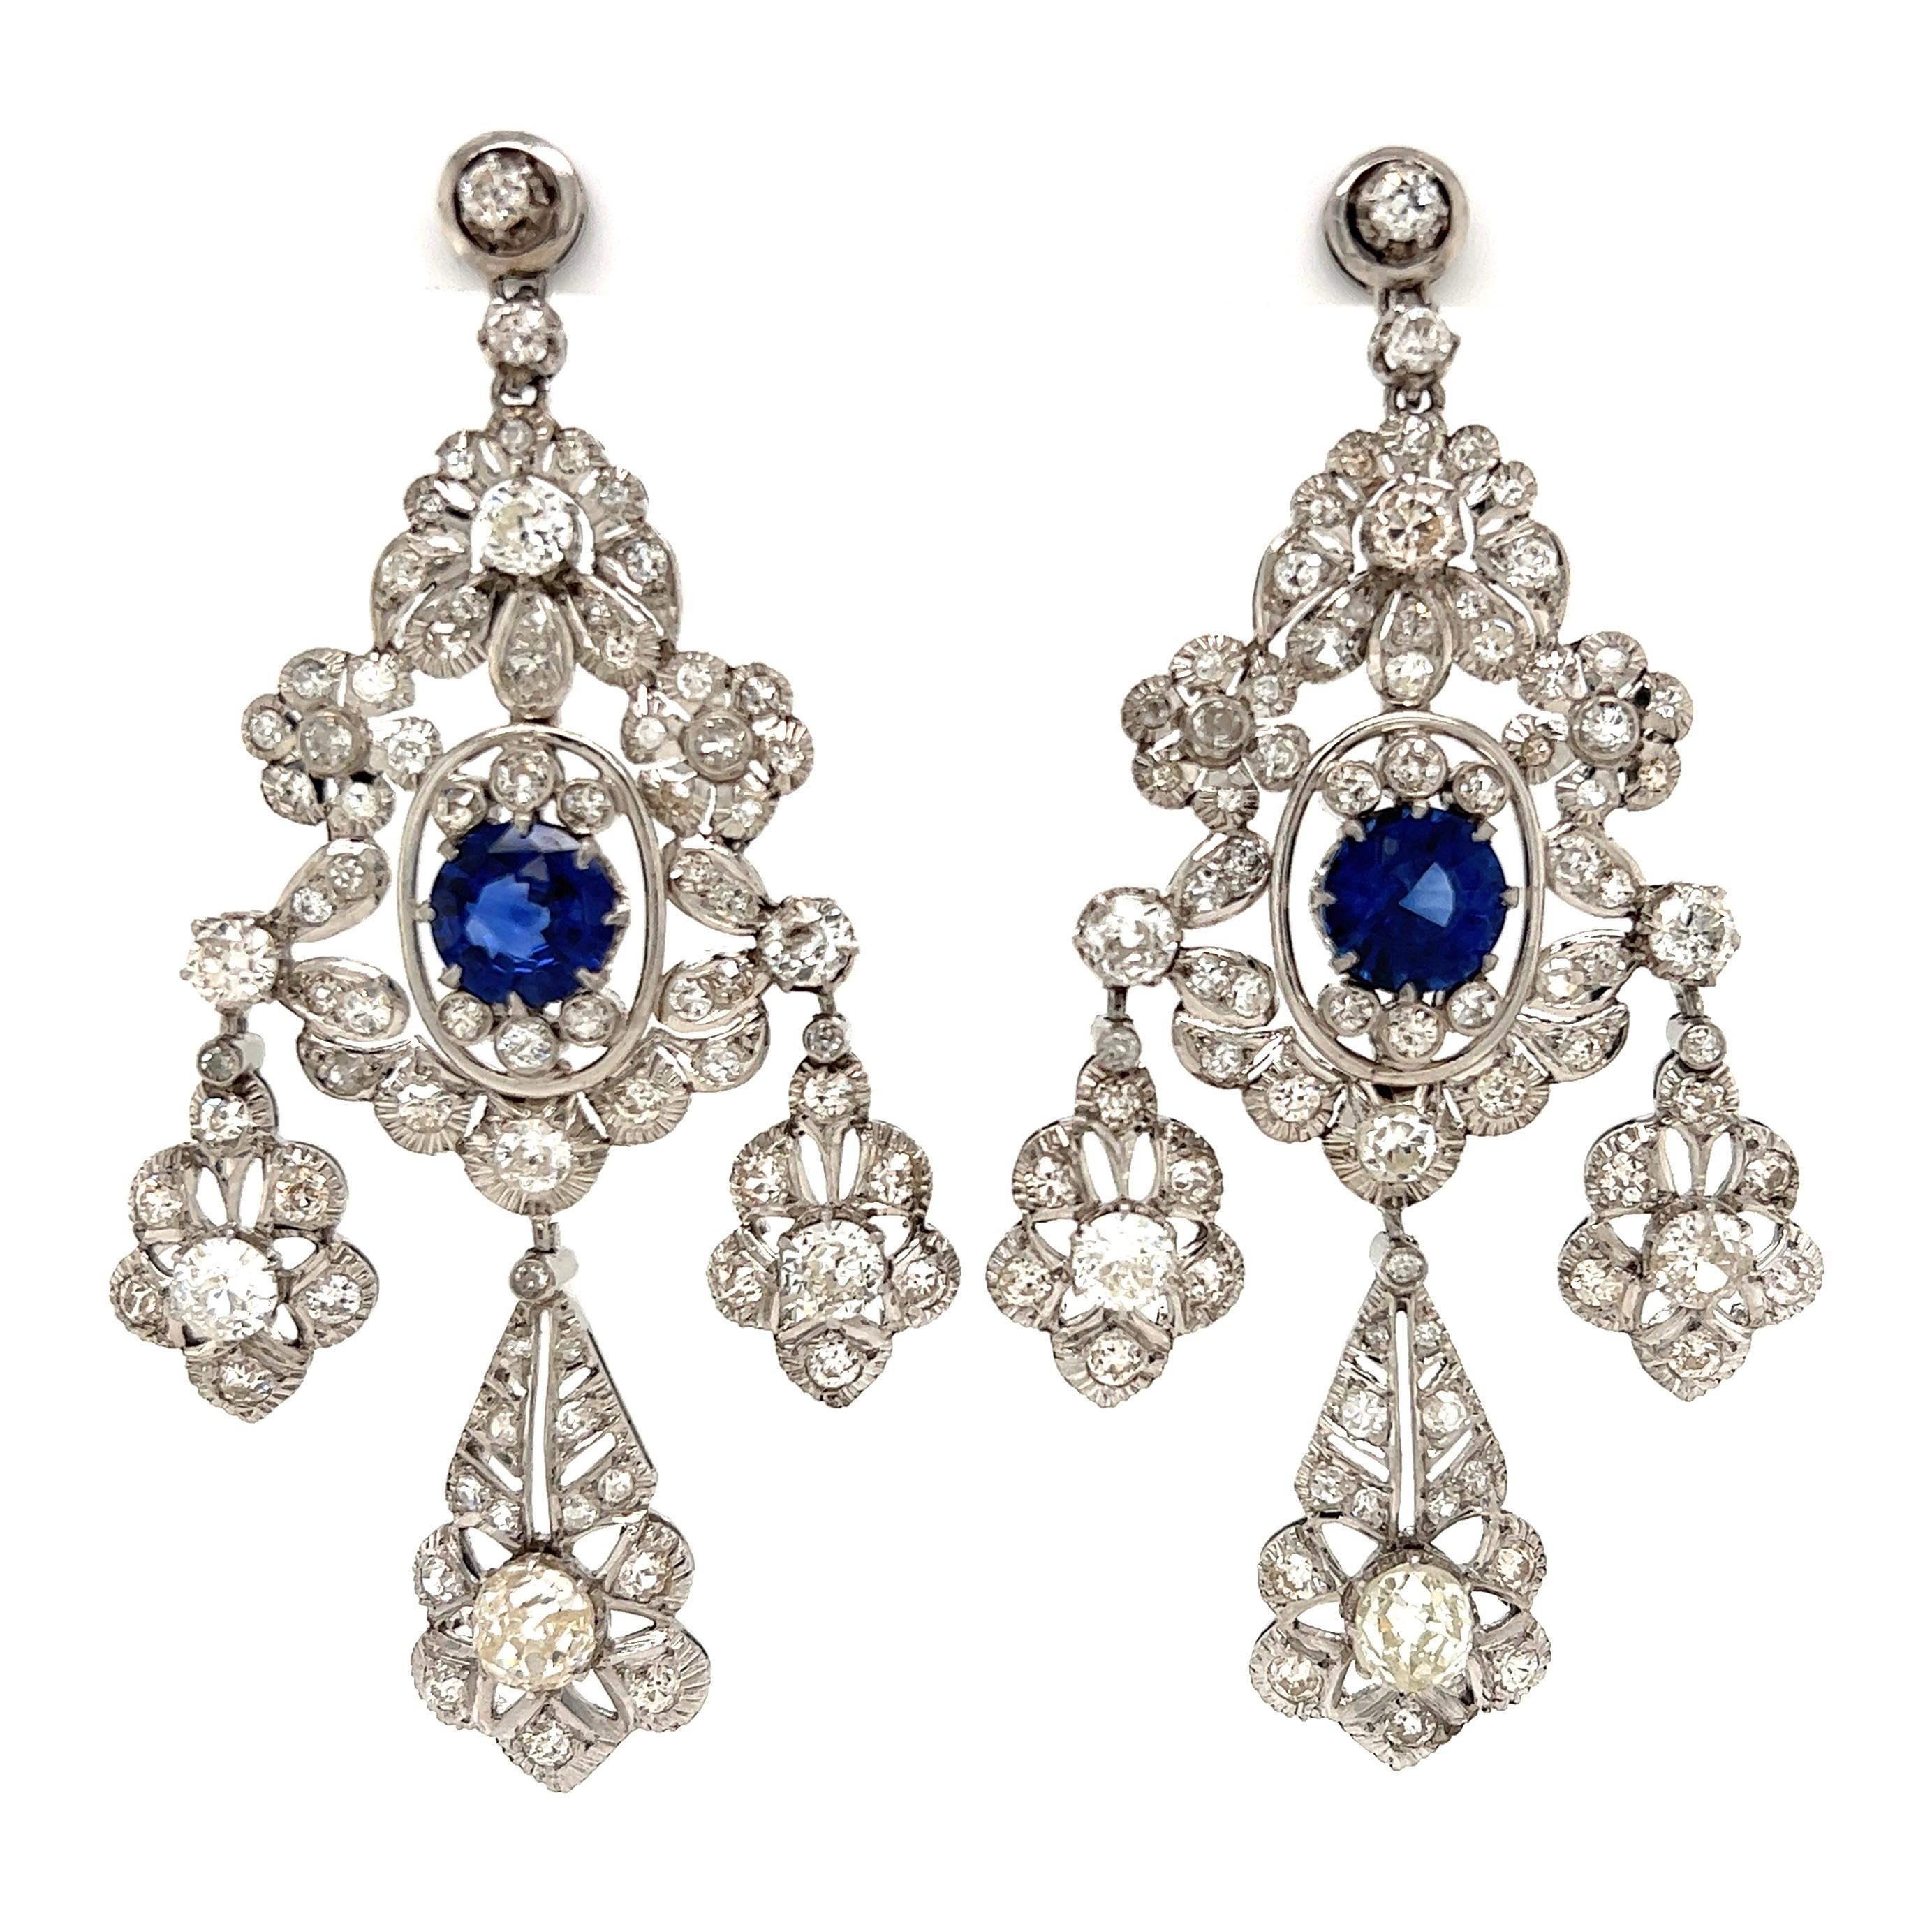 Awesome Chandelier Diamond and Sapphire Drop Earrings. Beautifully Hand crafted in Platinum. Hand set with Diamonds, approx. 8.50tcw; approx. 3.68tcw and Sapphire Gemstones approx. 3.68tcw. Earrings measure approx. 2.75” long. More Beautiful in real